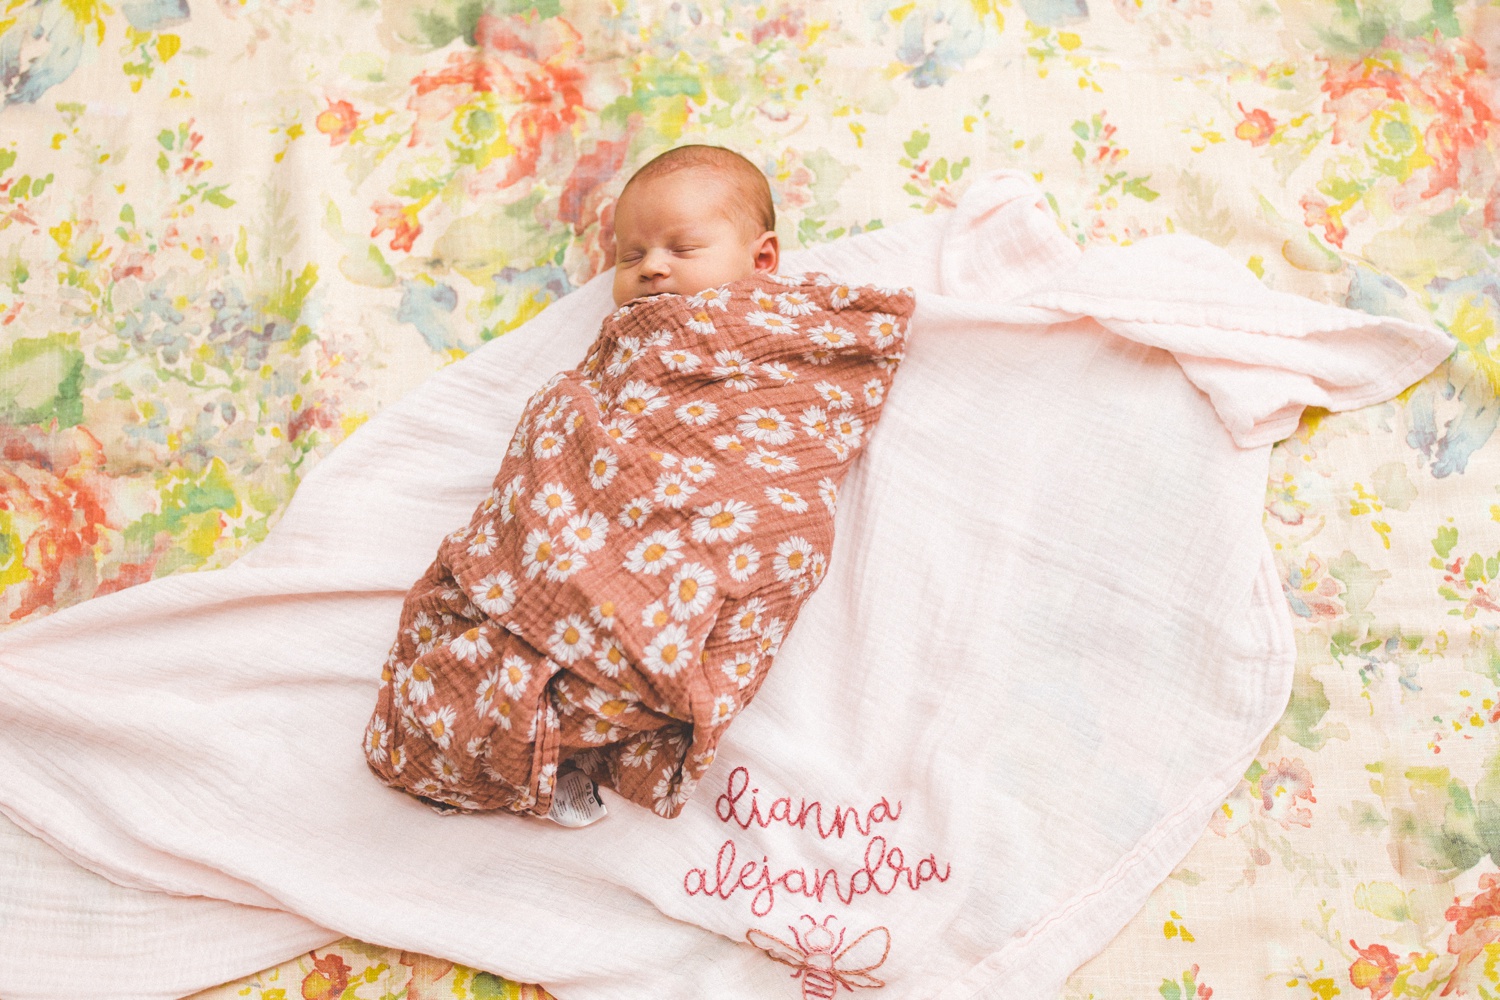 baby girl newborn photographs with floral blankets 